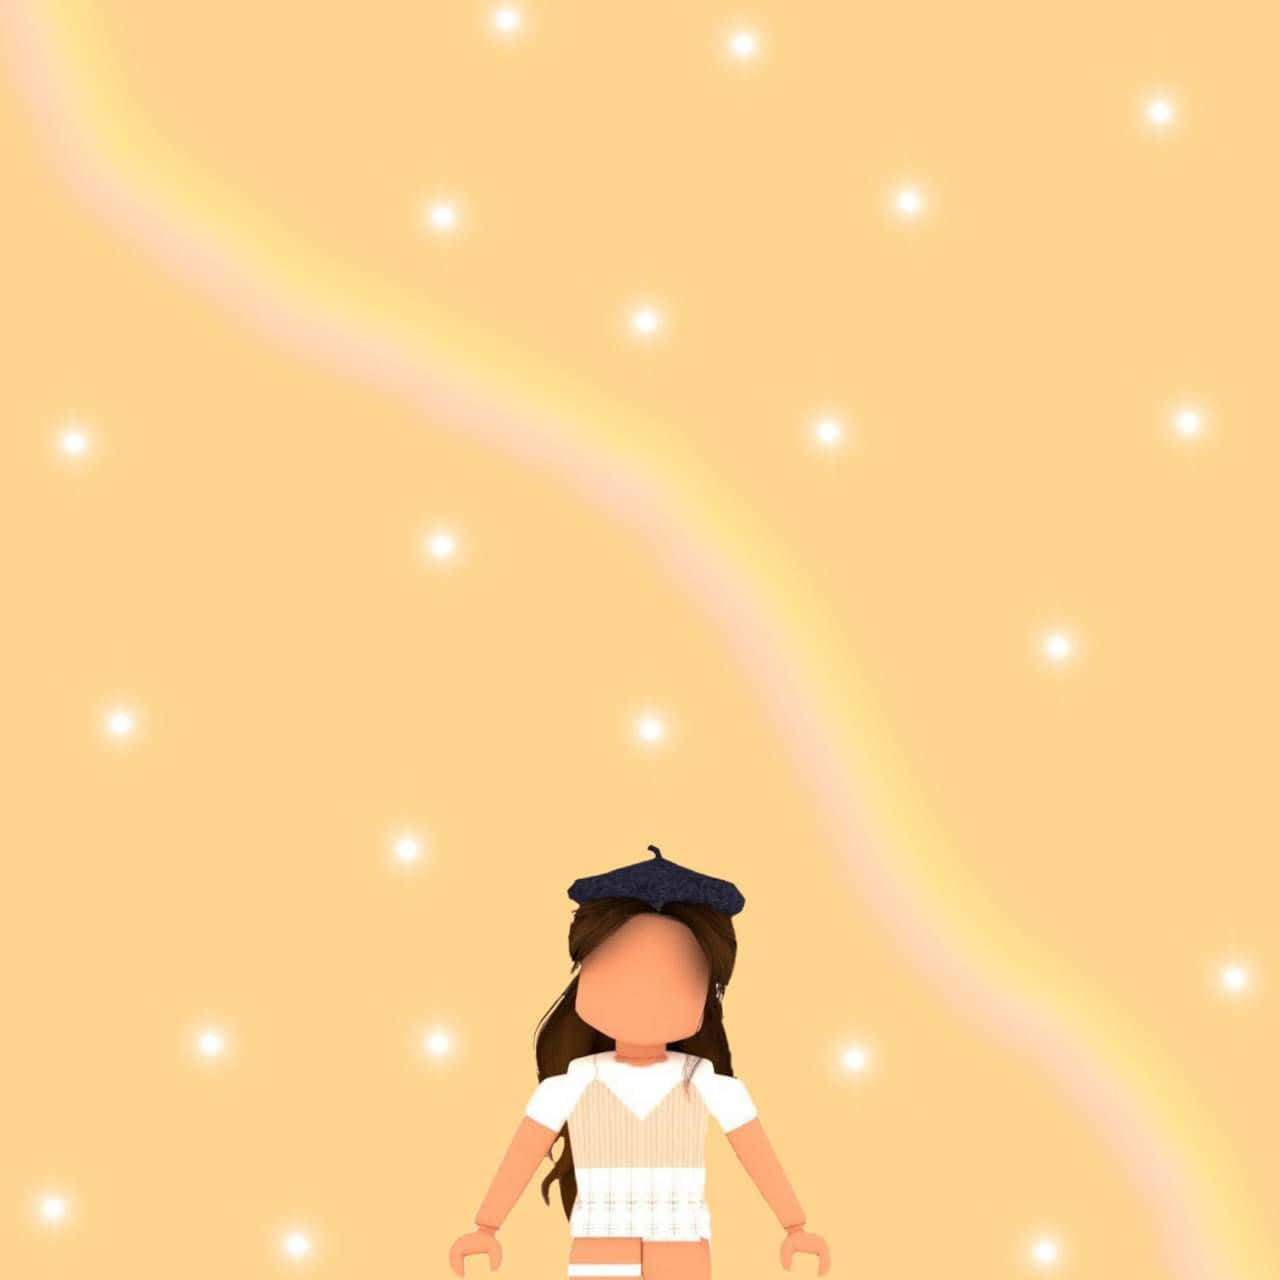 A Girl In A White Dress Standing In Front Of A Starry Sky Background